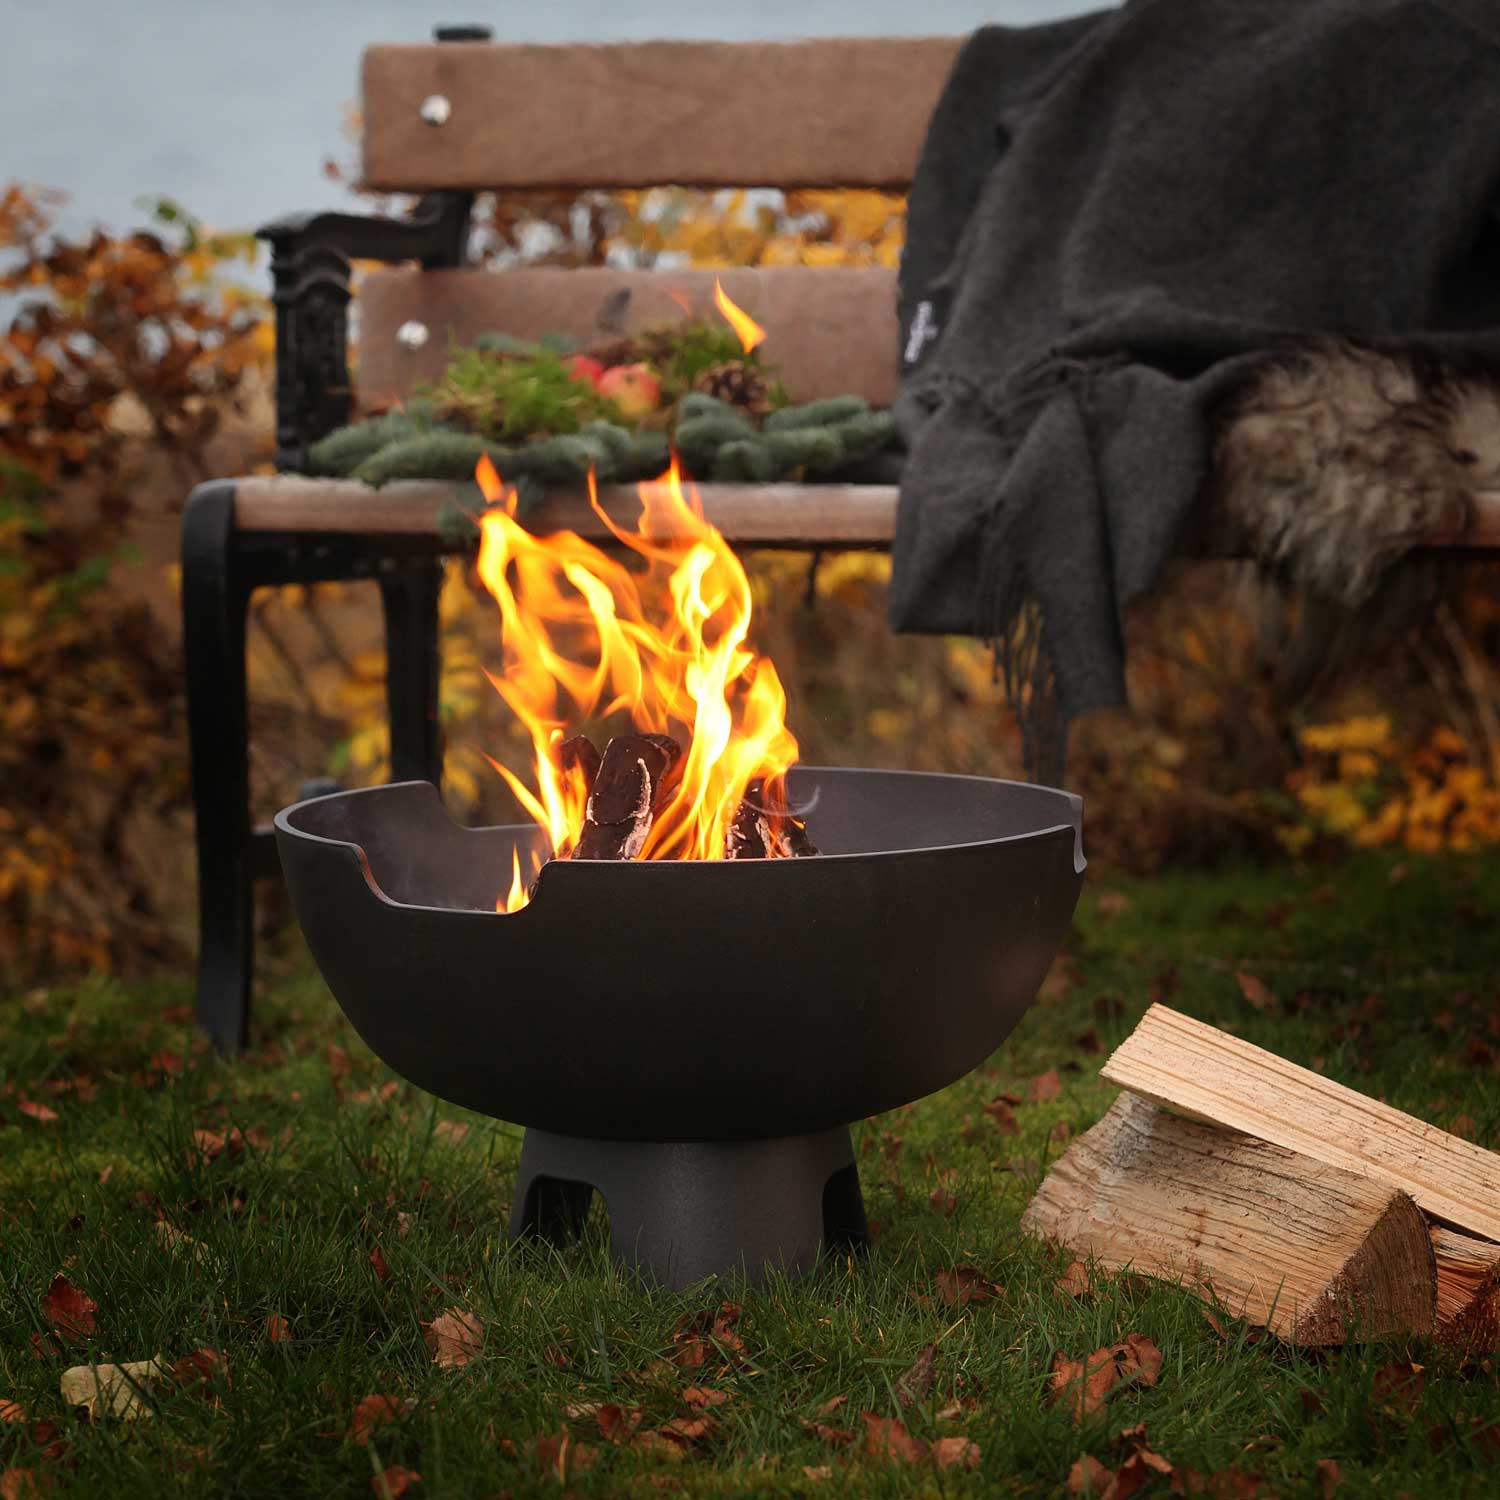 What To Use For A Fire Pit